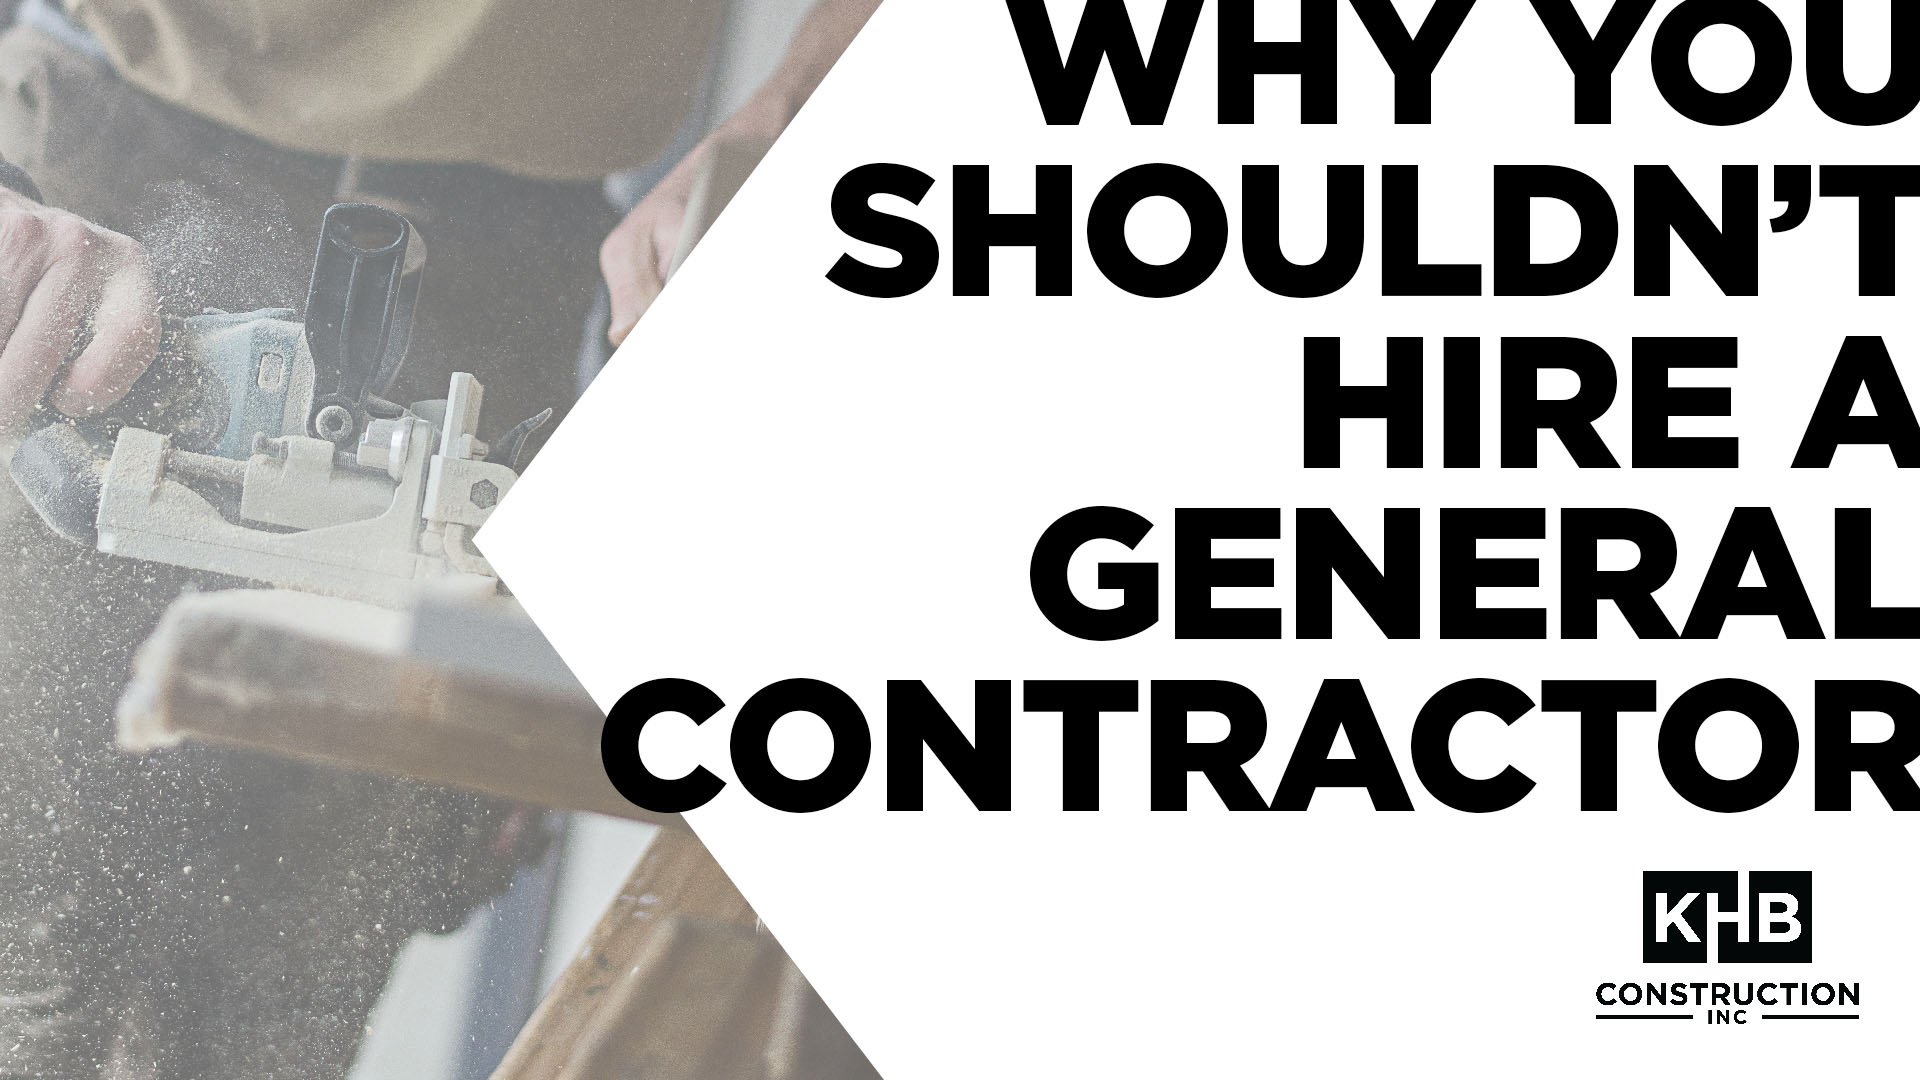 Why You Shouldn't Hire A Contractor